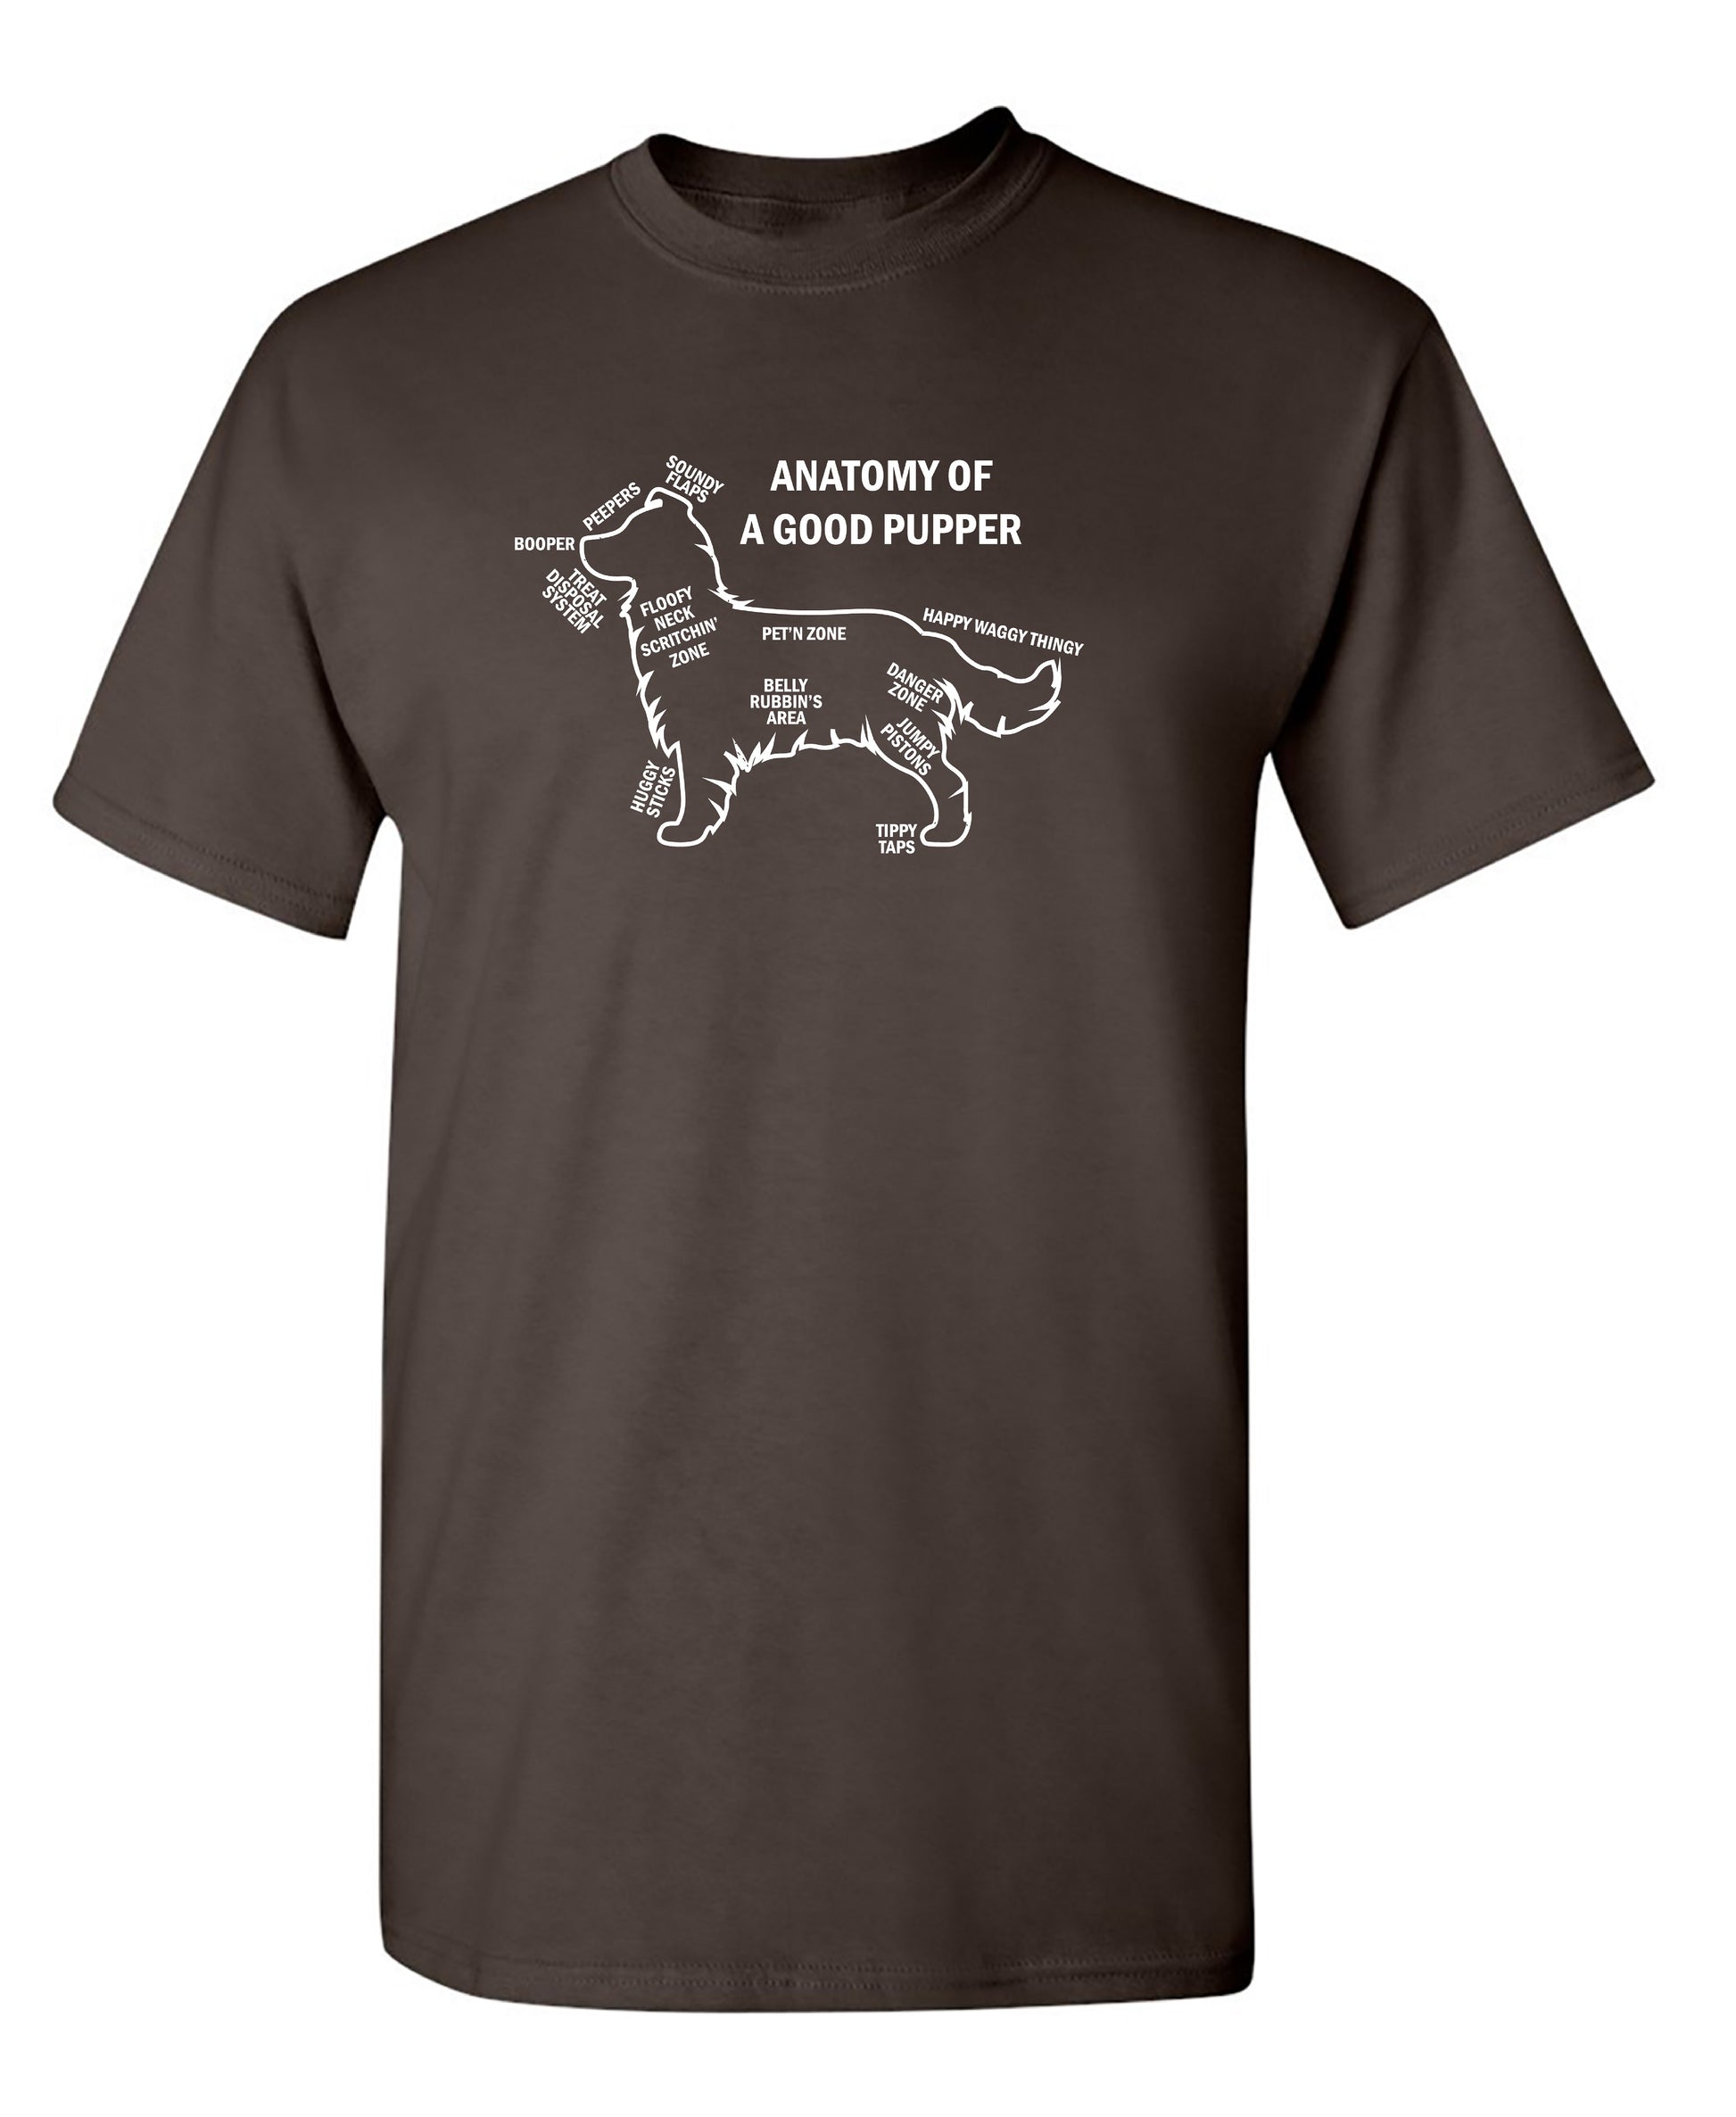 Anatomy Of A Good Pupper - Funny T Shirts & Graphic Tees